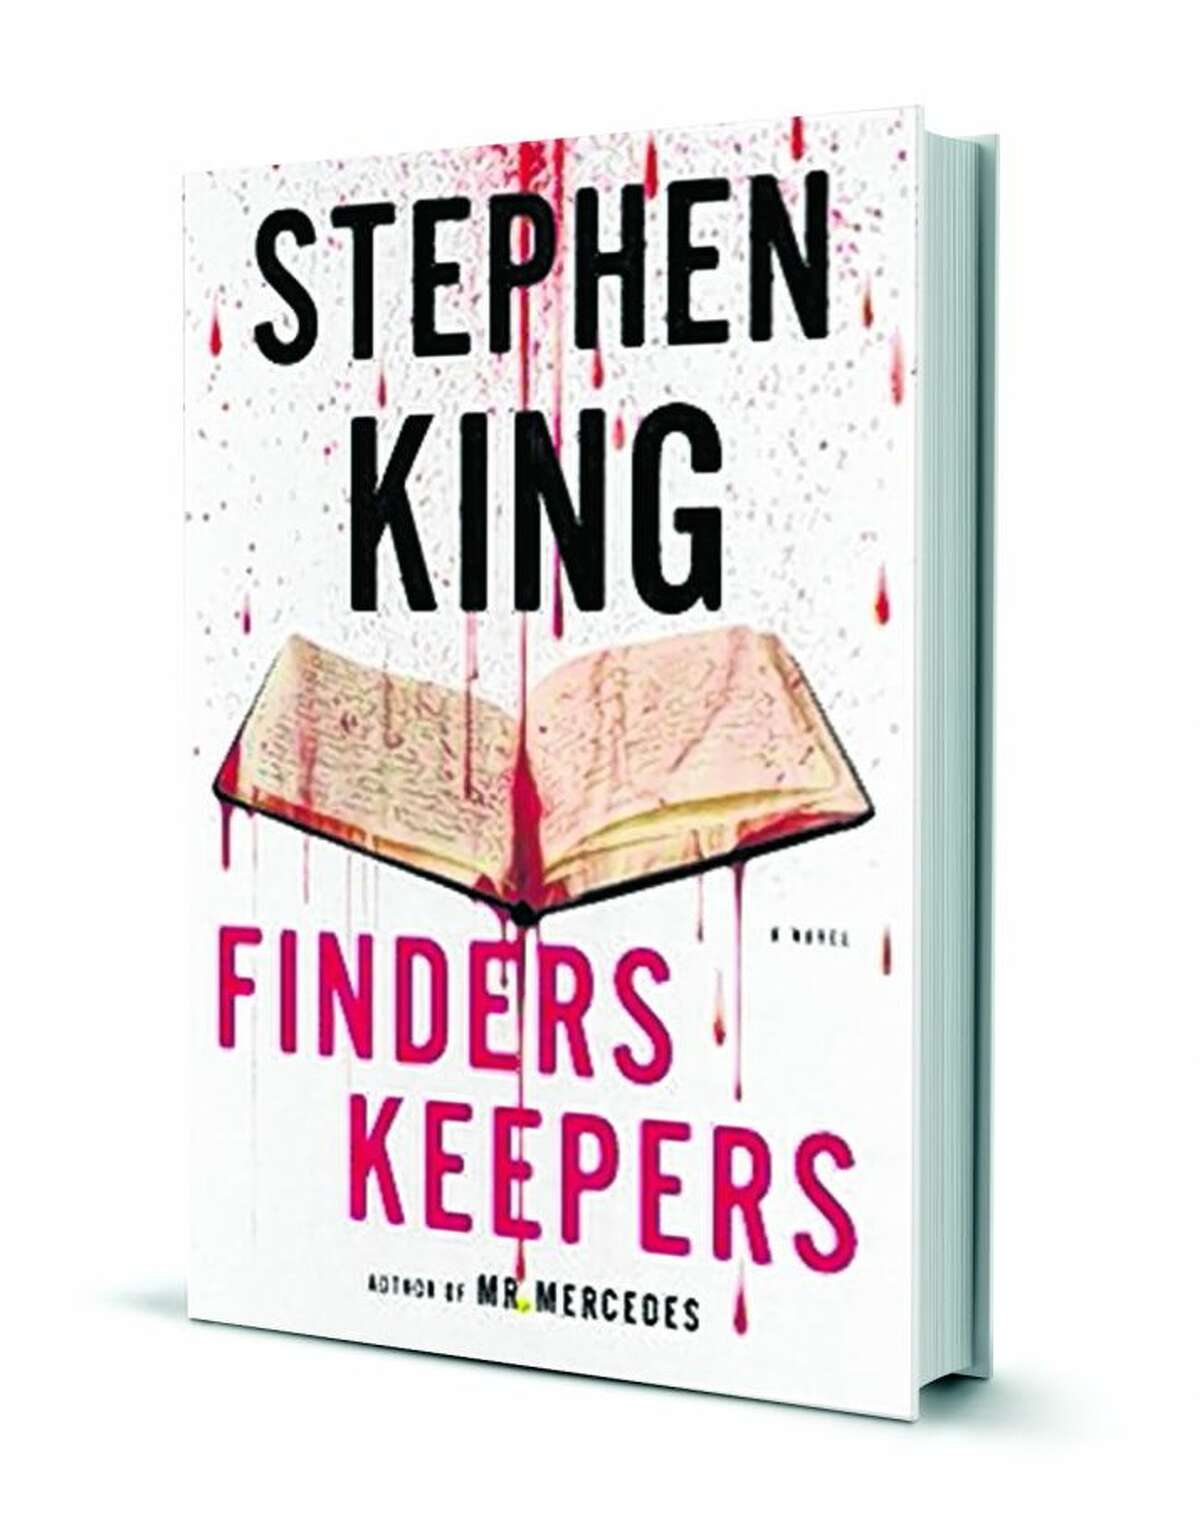 Starring the same unlikely trio King introduced in "Mr. Mercedes," "Finders Keepers" is a suspense novel about an avid reader who's obsessed with a reclusive writer. Sound like any other Stephen King novel you know? Read the review: King's high-speed crime thriller